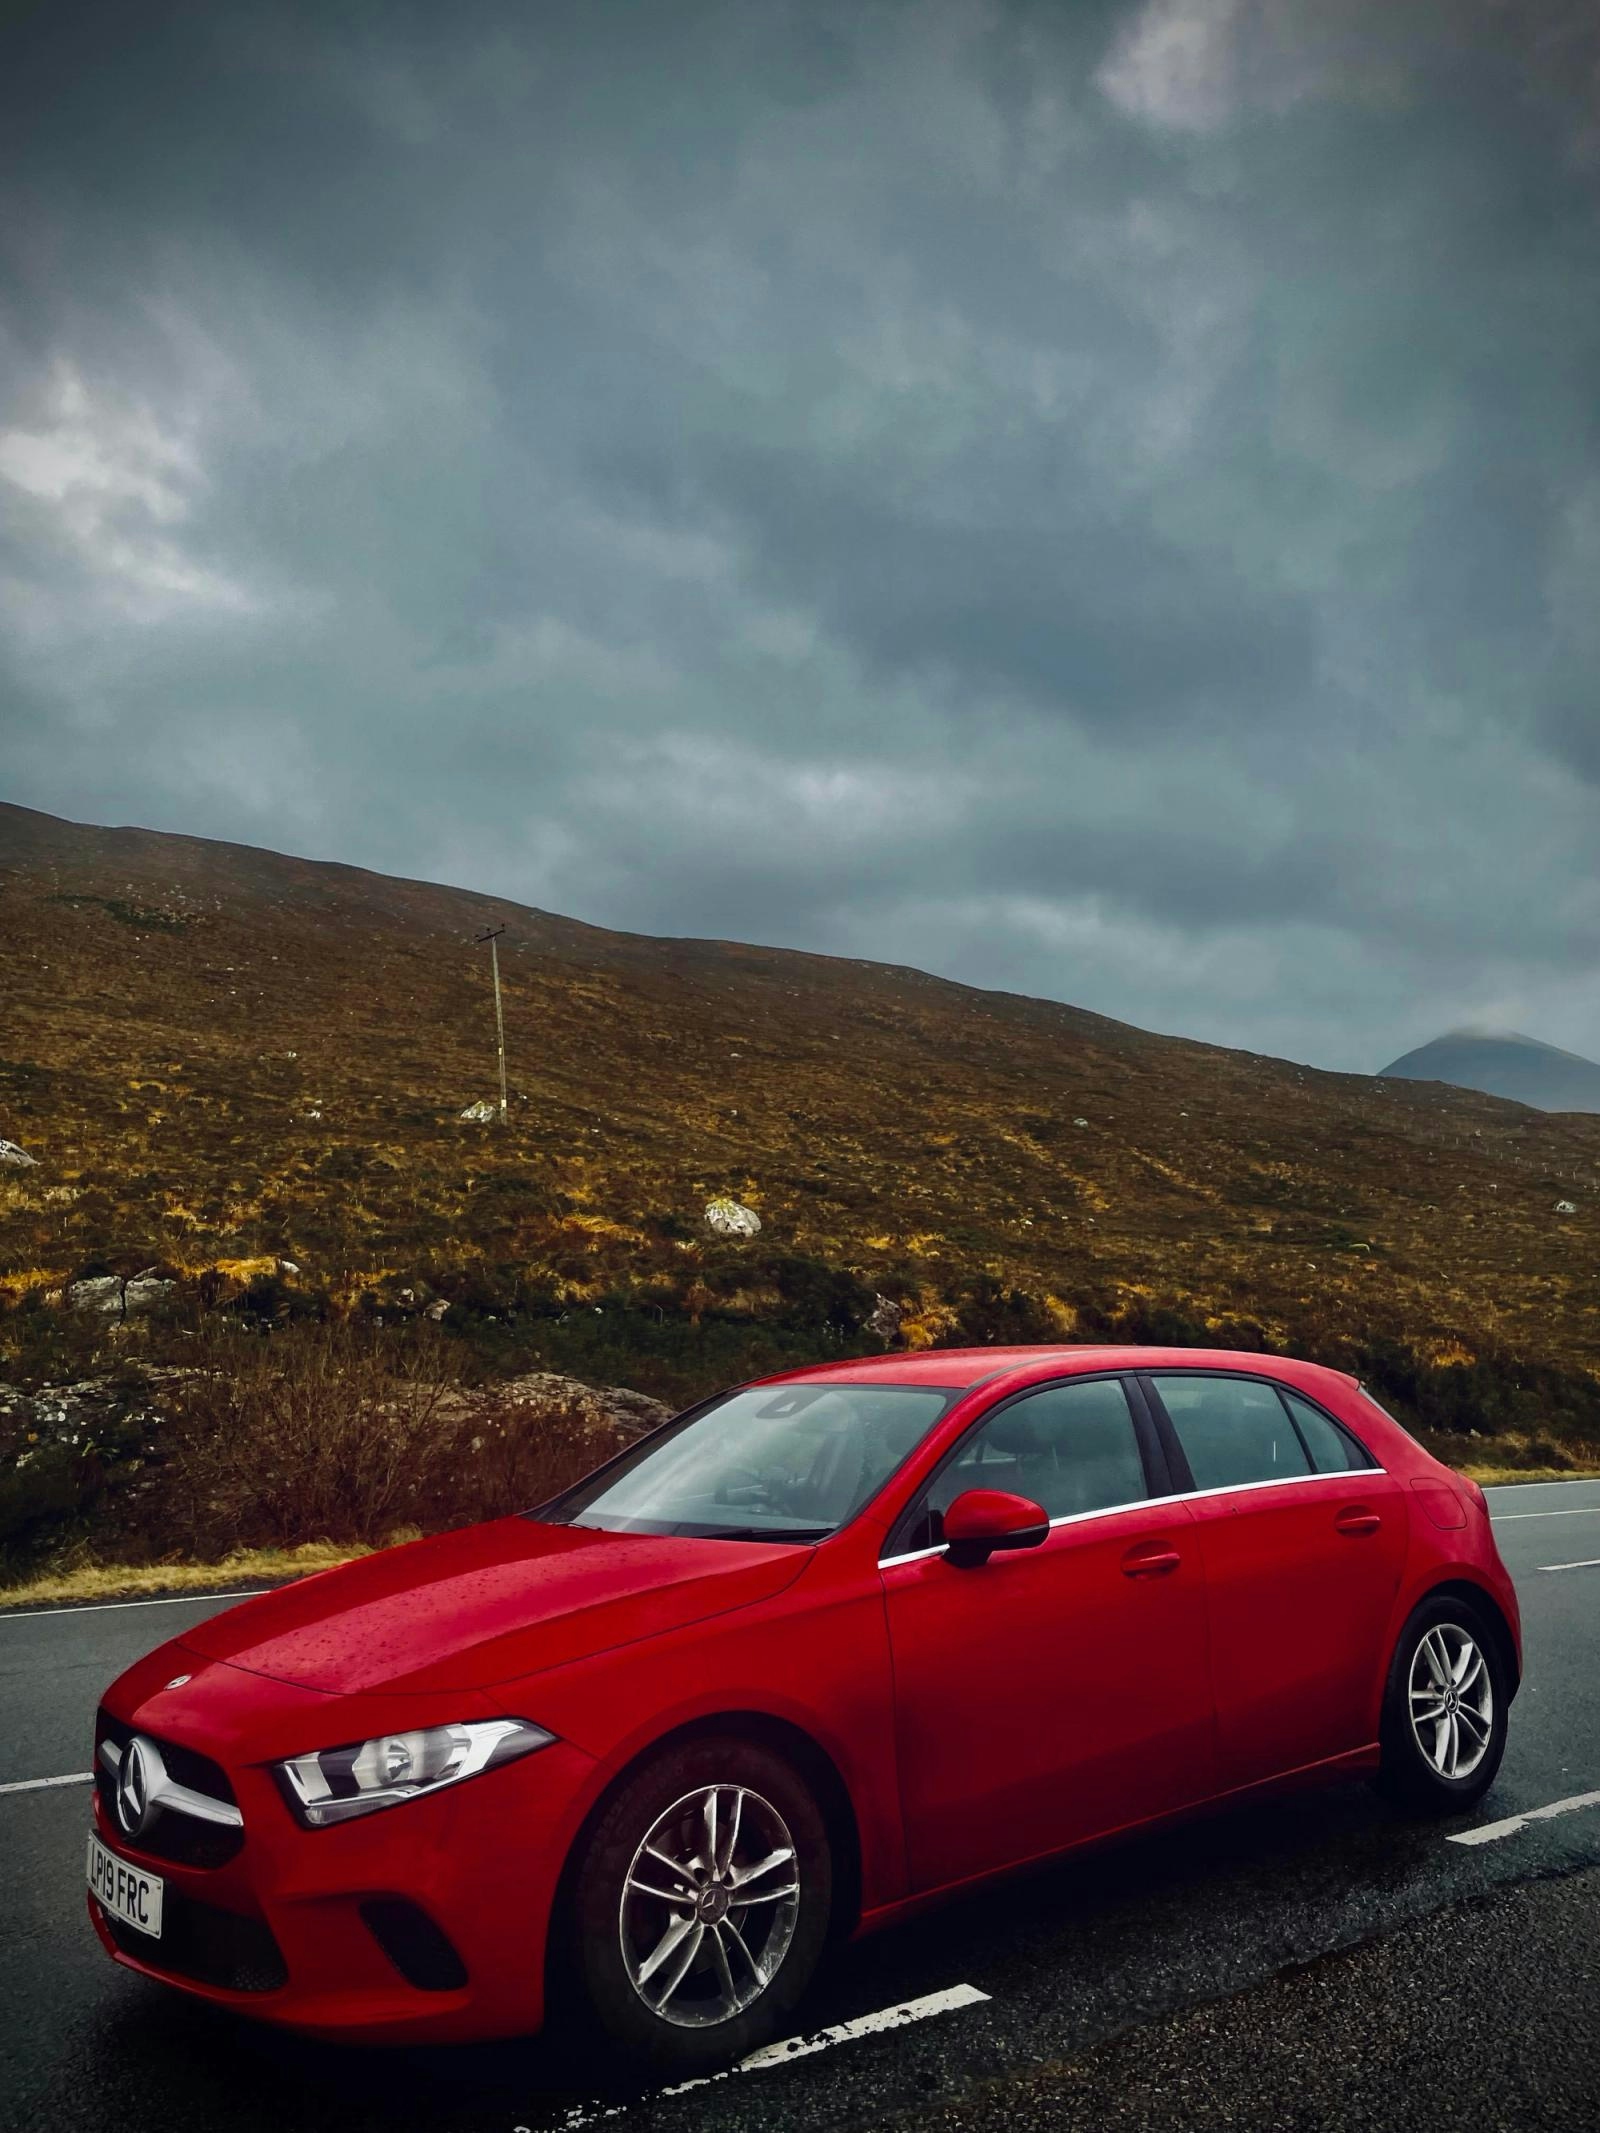 Ashore-mobile #1. Somewhere in Skye. Early 2023.